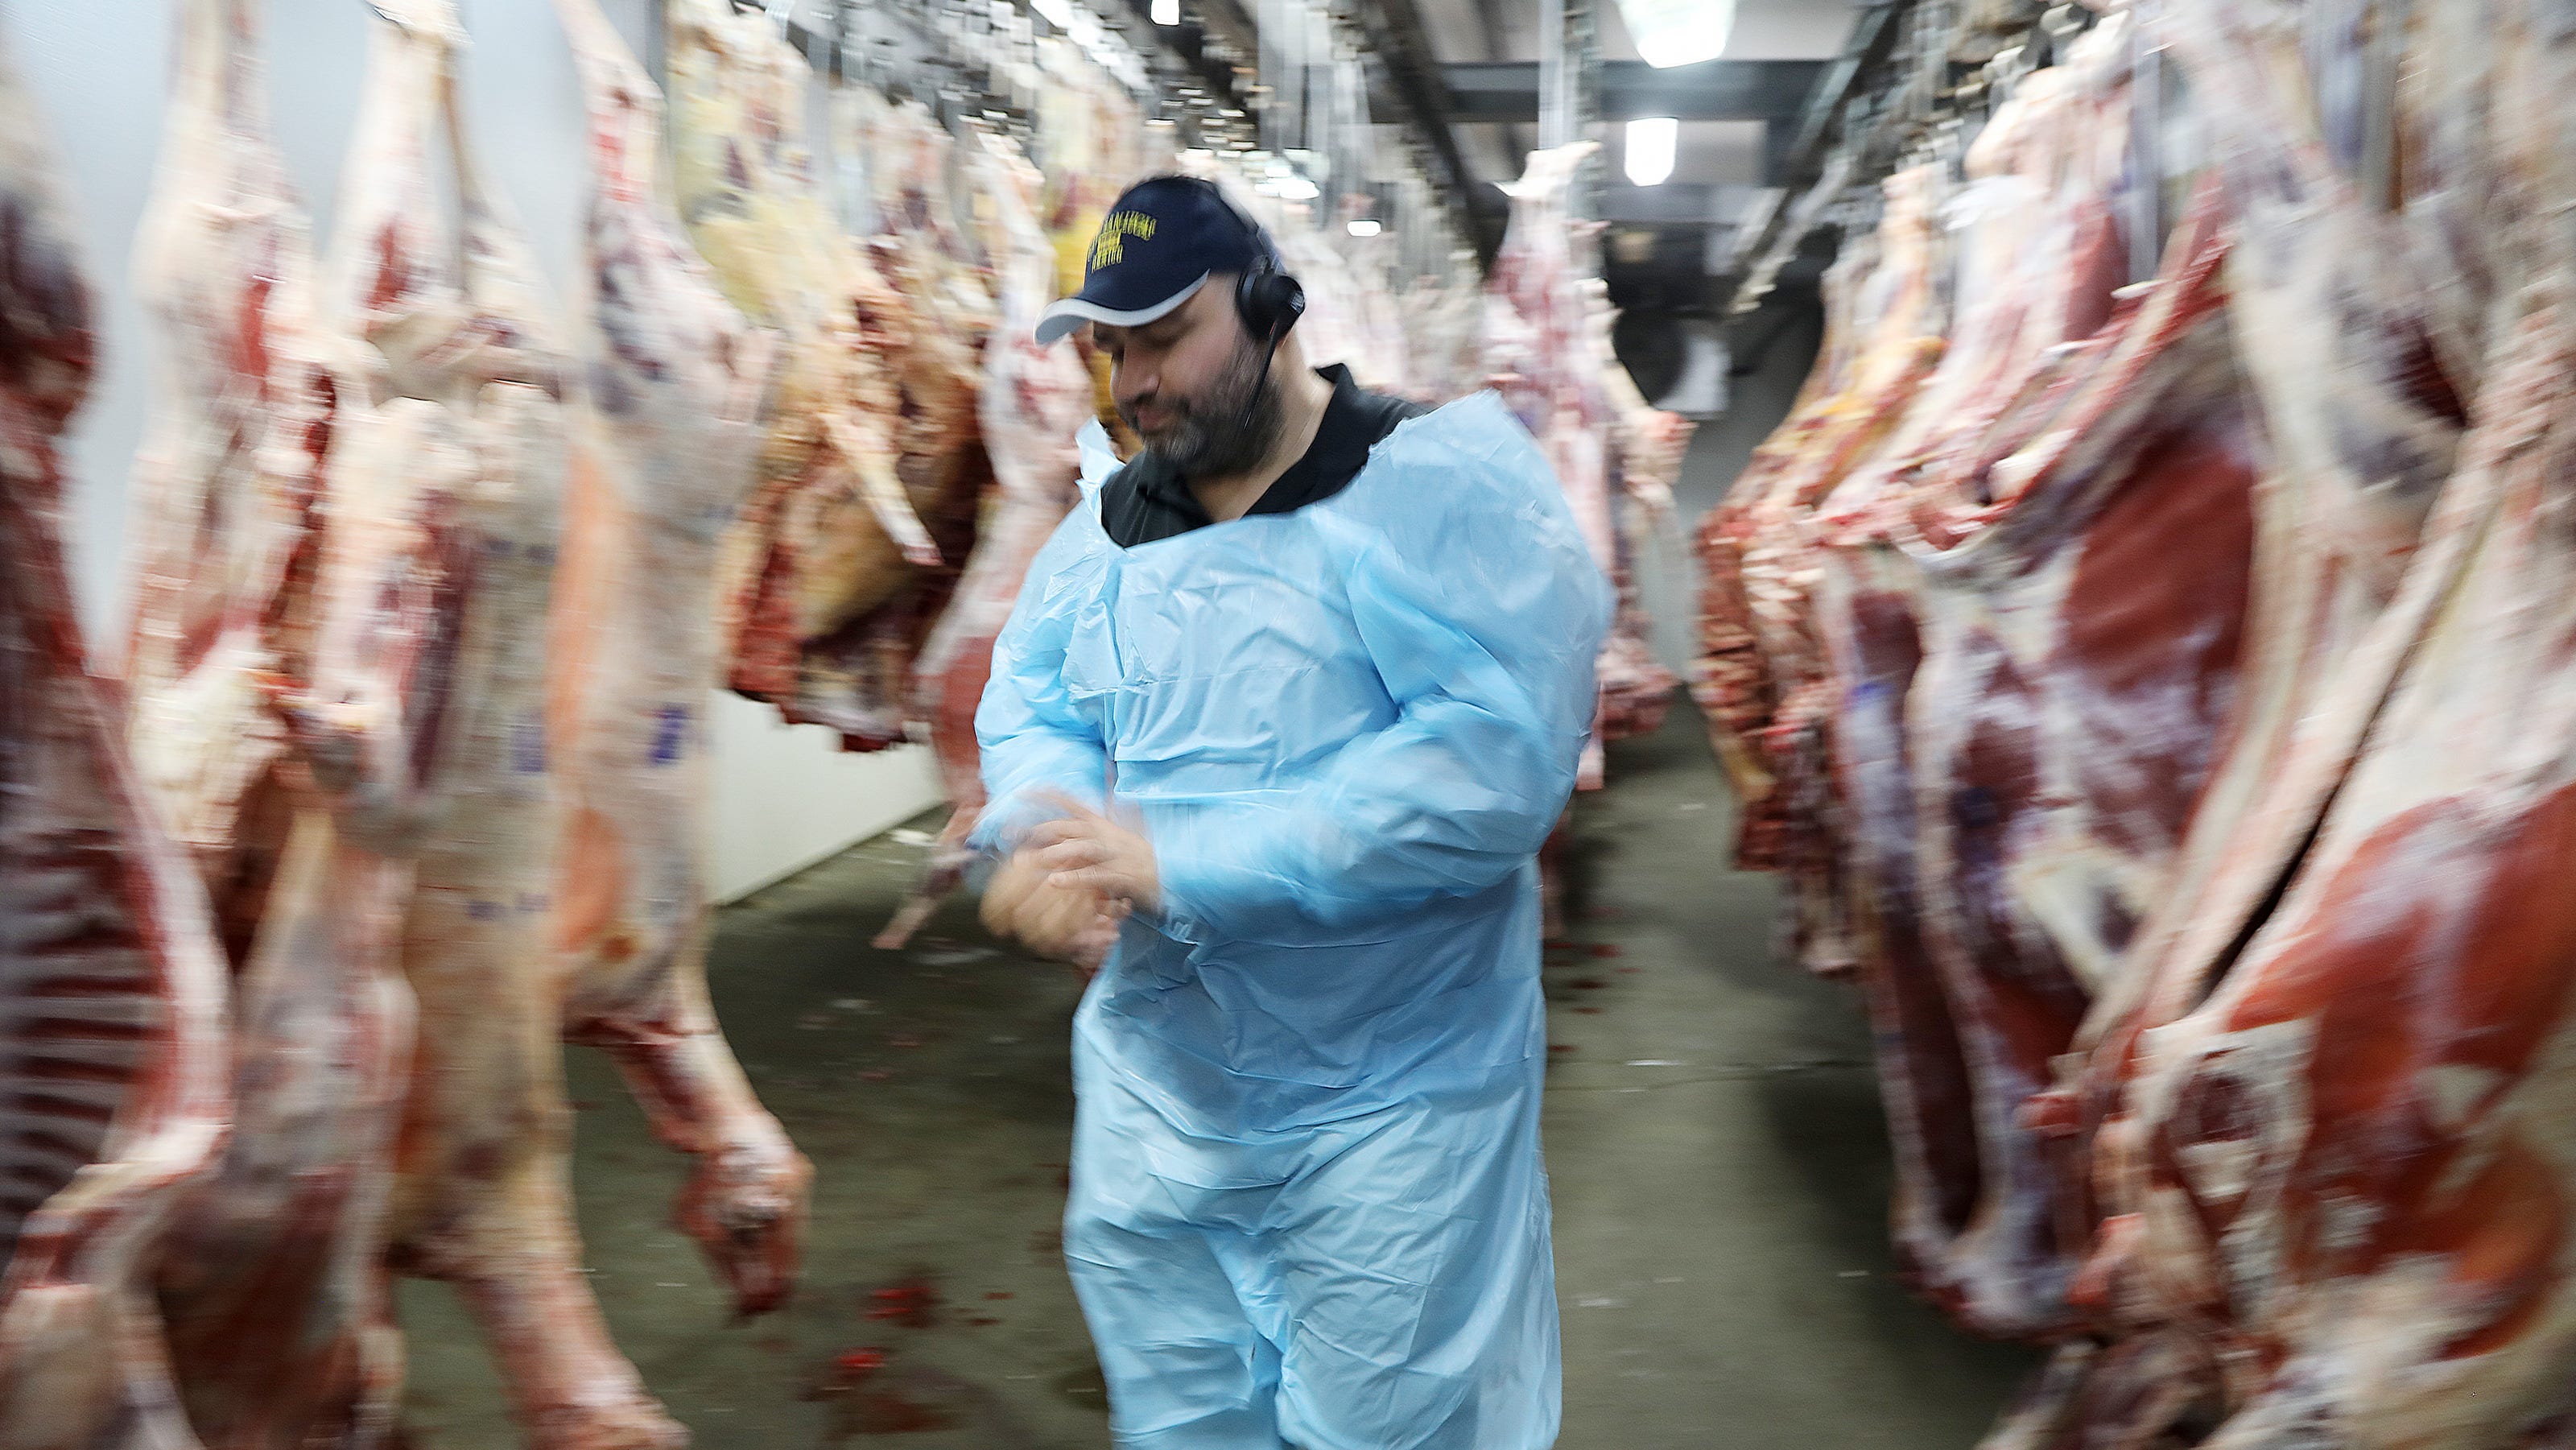  In Paterson, a halal slaughterhouse faces 'overwhelming' pace ahead of Muslim holiday 